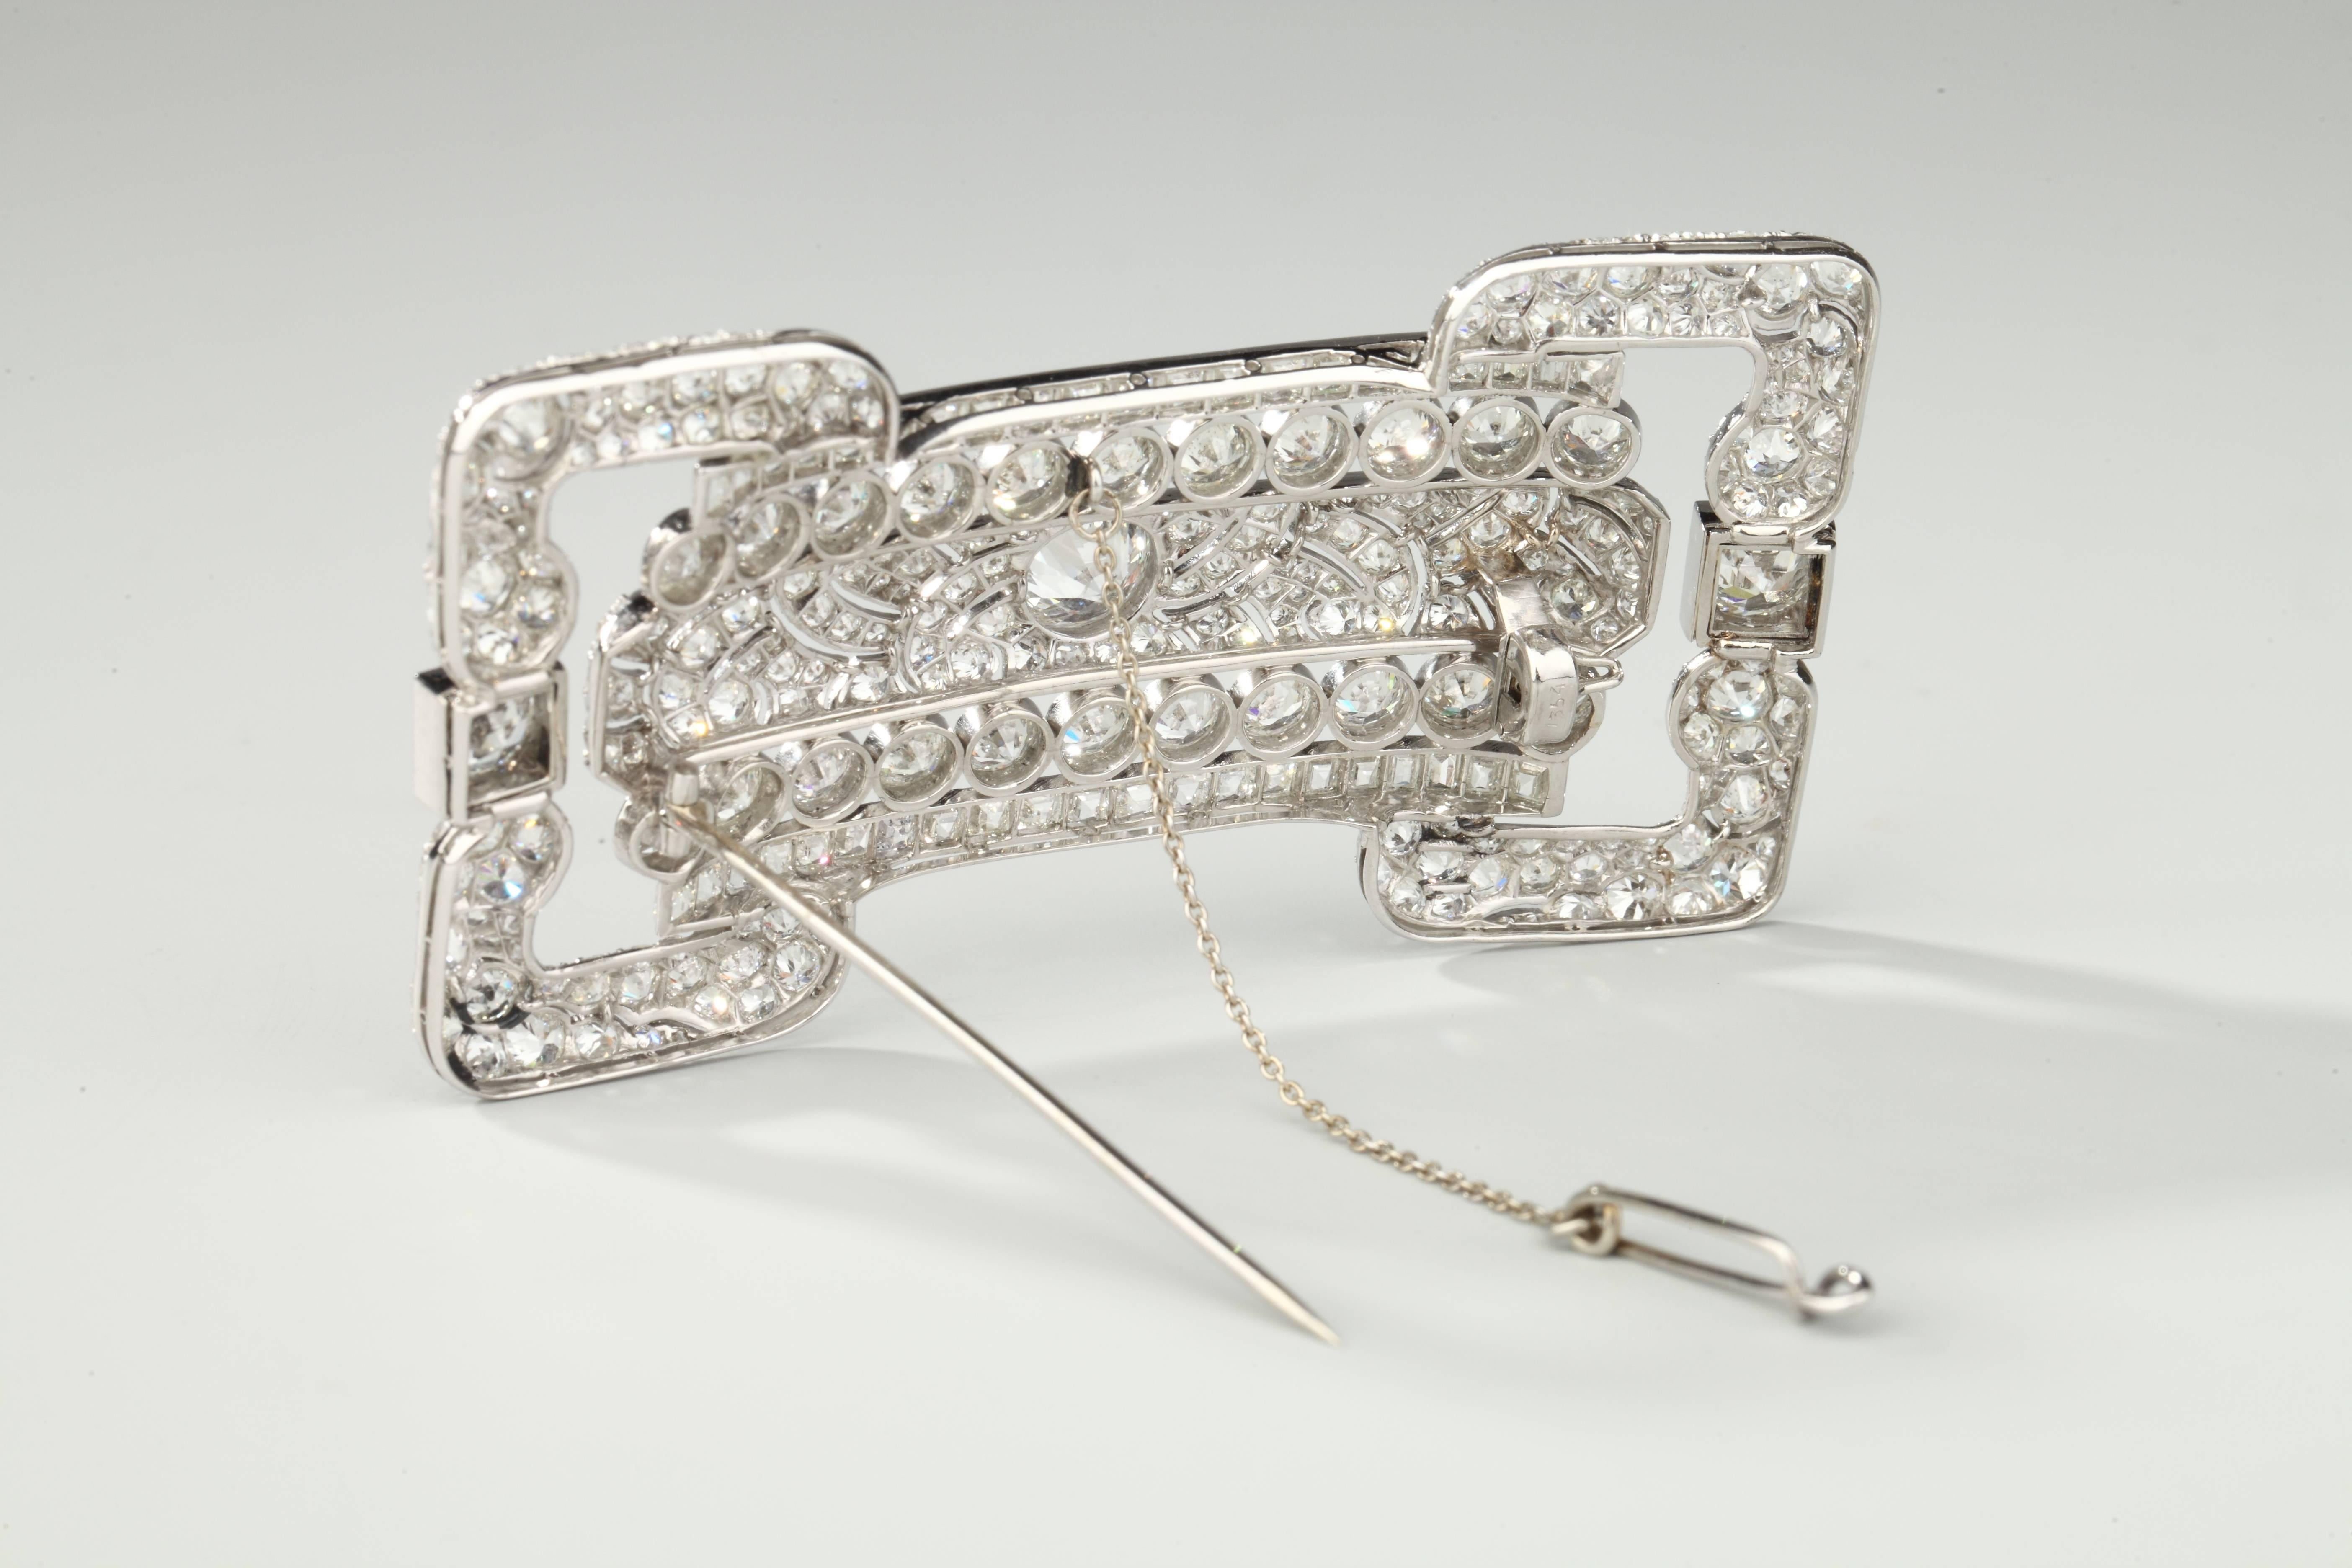 Large brooch in platinum designed as belt buckle set with round and square cut diamonds, the center one around 1.25 ct.
Total weight of diamonds around 22 carats.
The pin is in 18k gold.